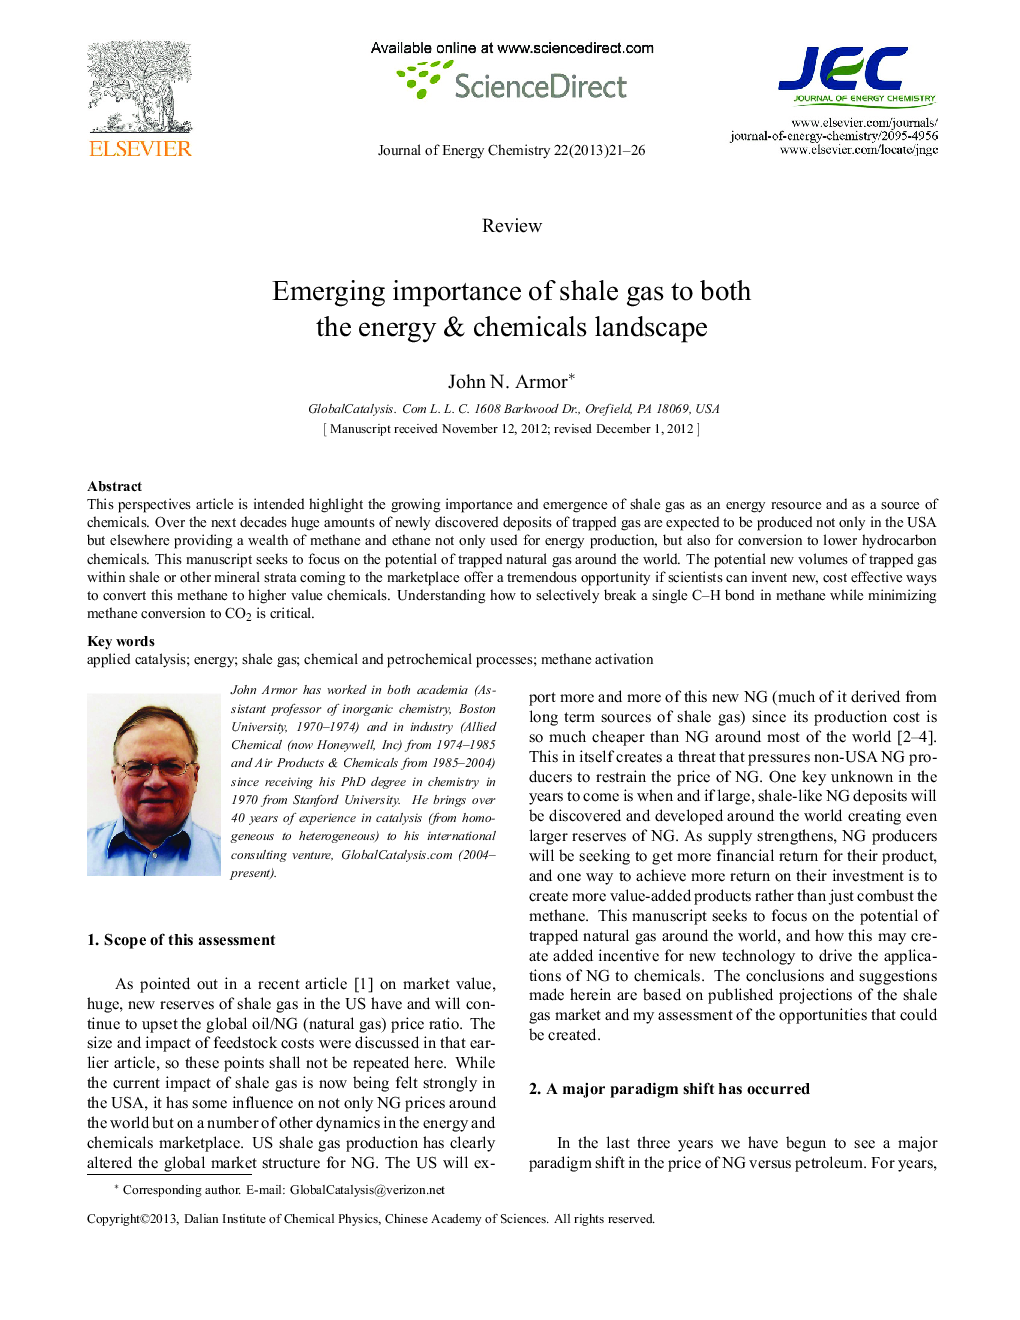 Emerging importance of shale gas to both the energy & chemicals landscape